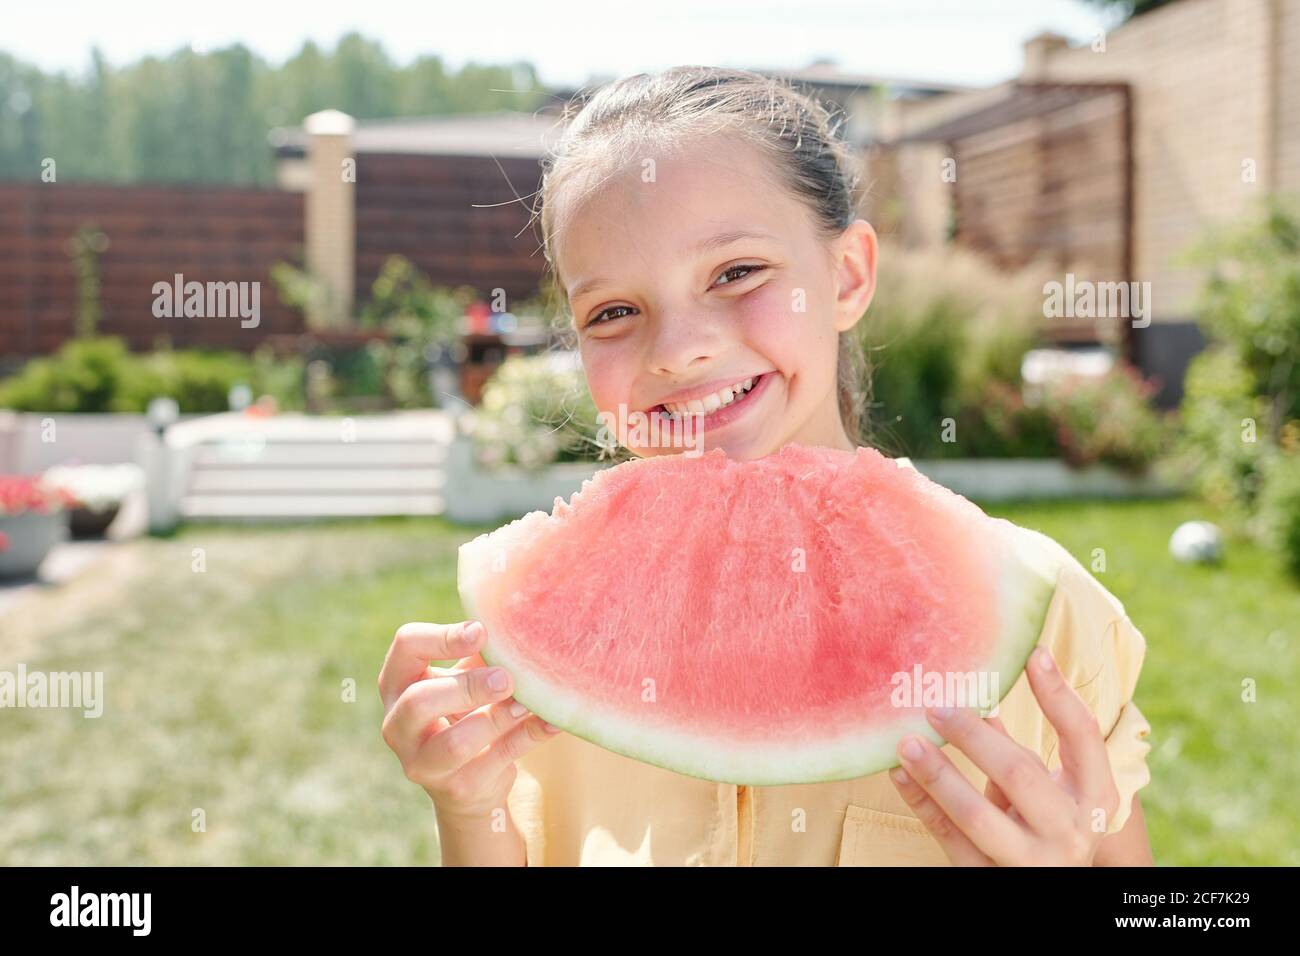 Medium close-up portrait of happy little girl standing in backyard on summer day holding piece of watermelon smiling at camera Stock Photo